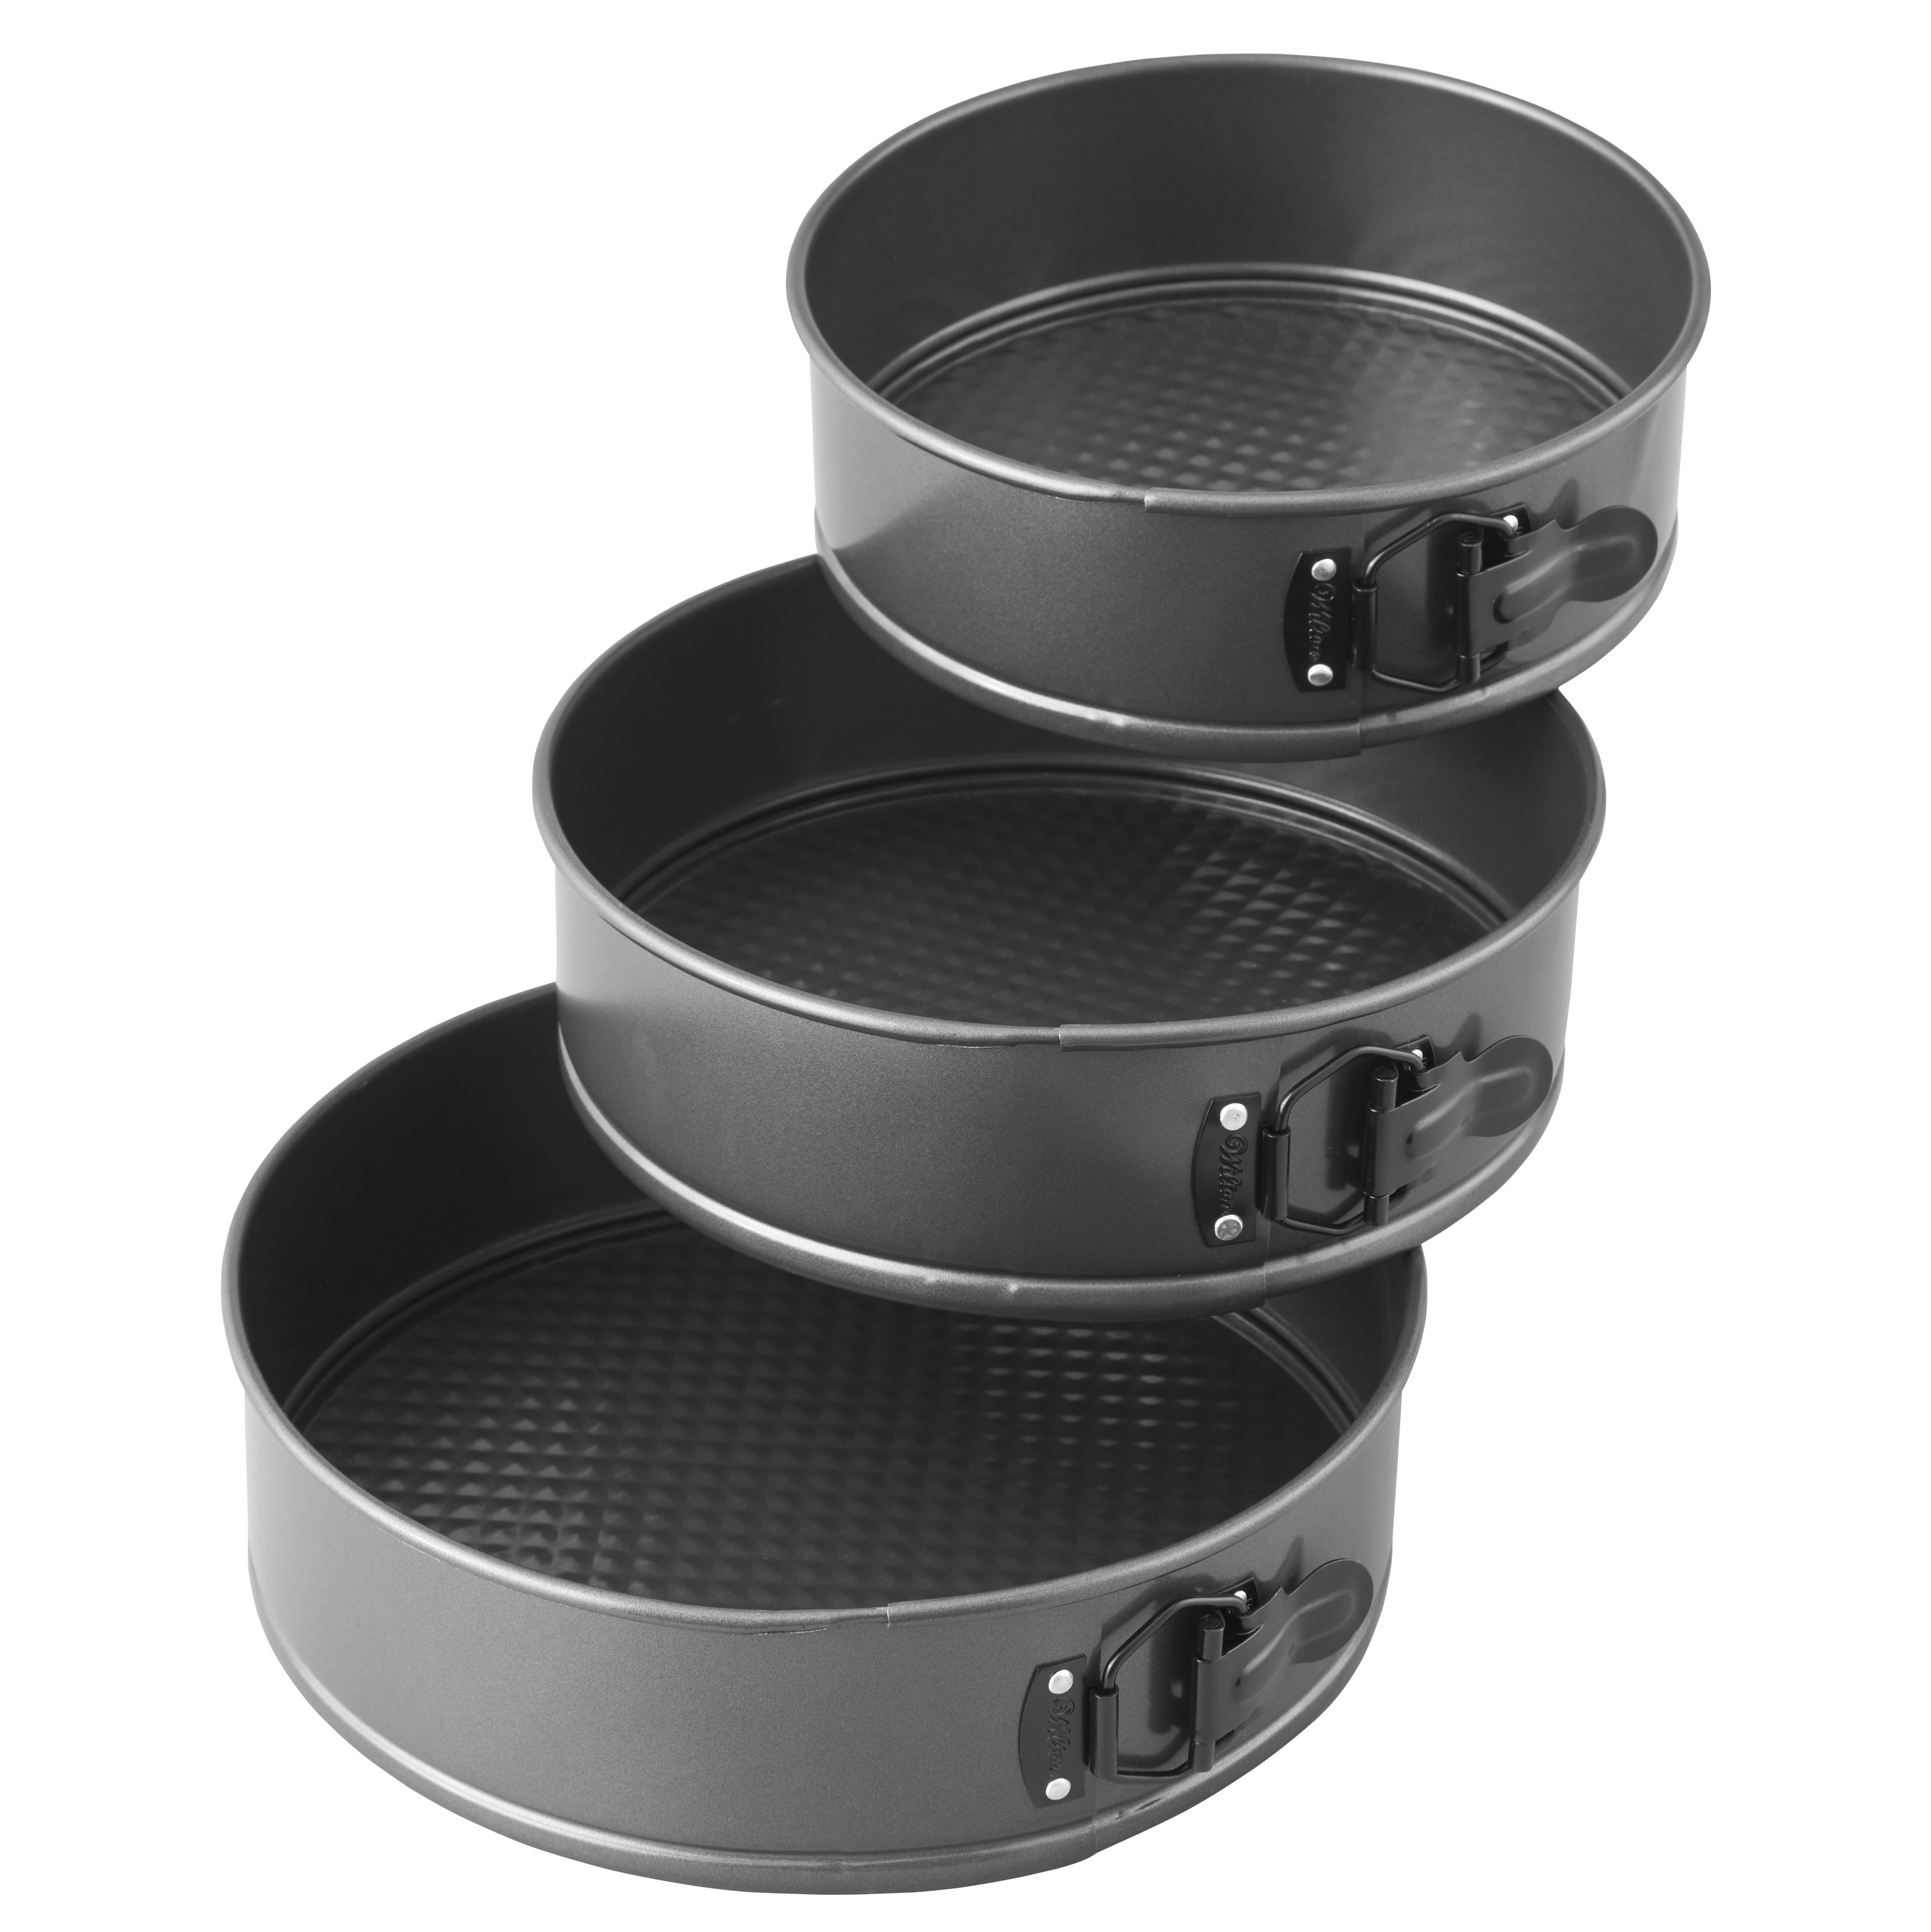 Details about   2x Set of Round Non-Stick 7-Inch Spring Form Deep Cake Bake Tins Oven Tray 